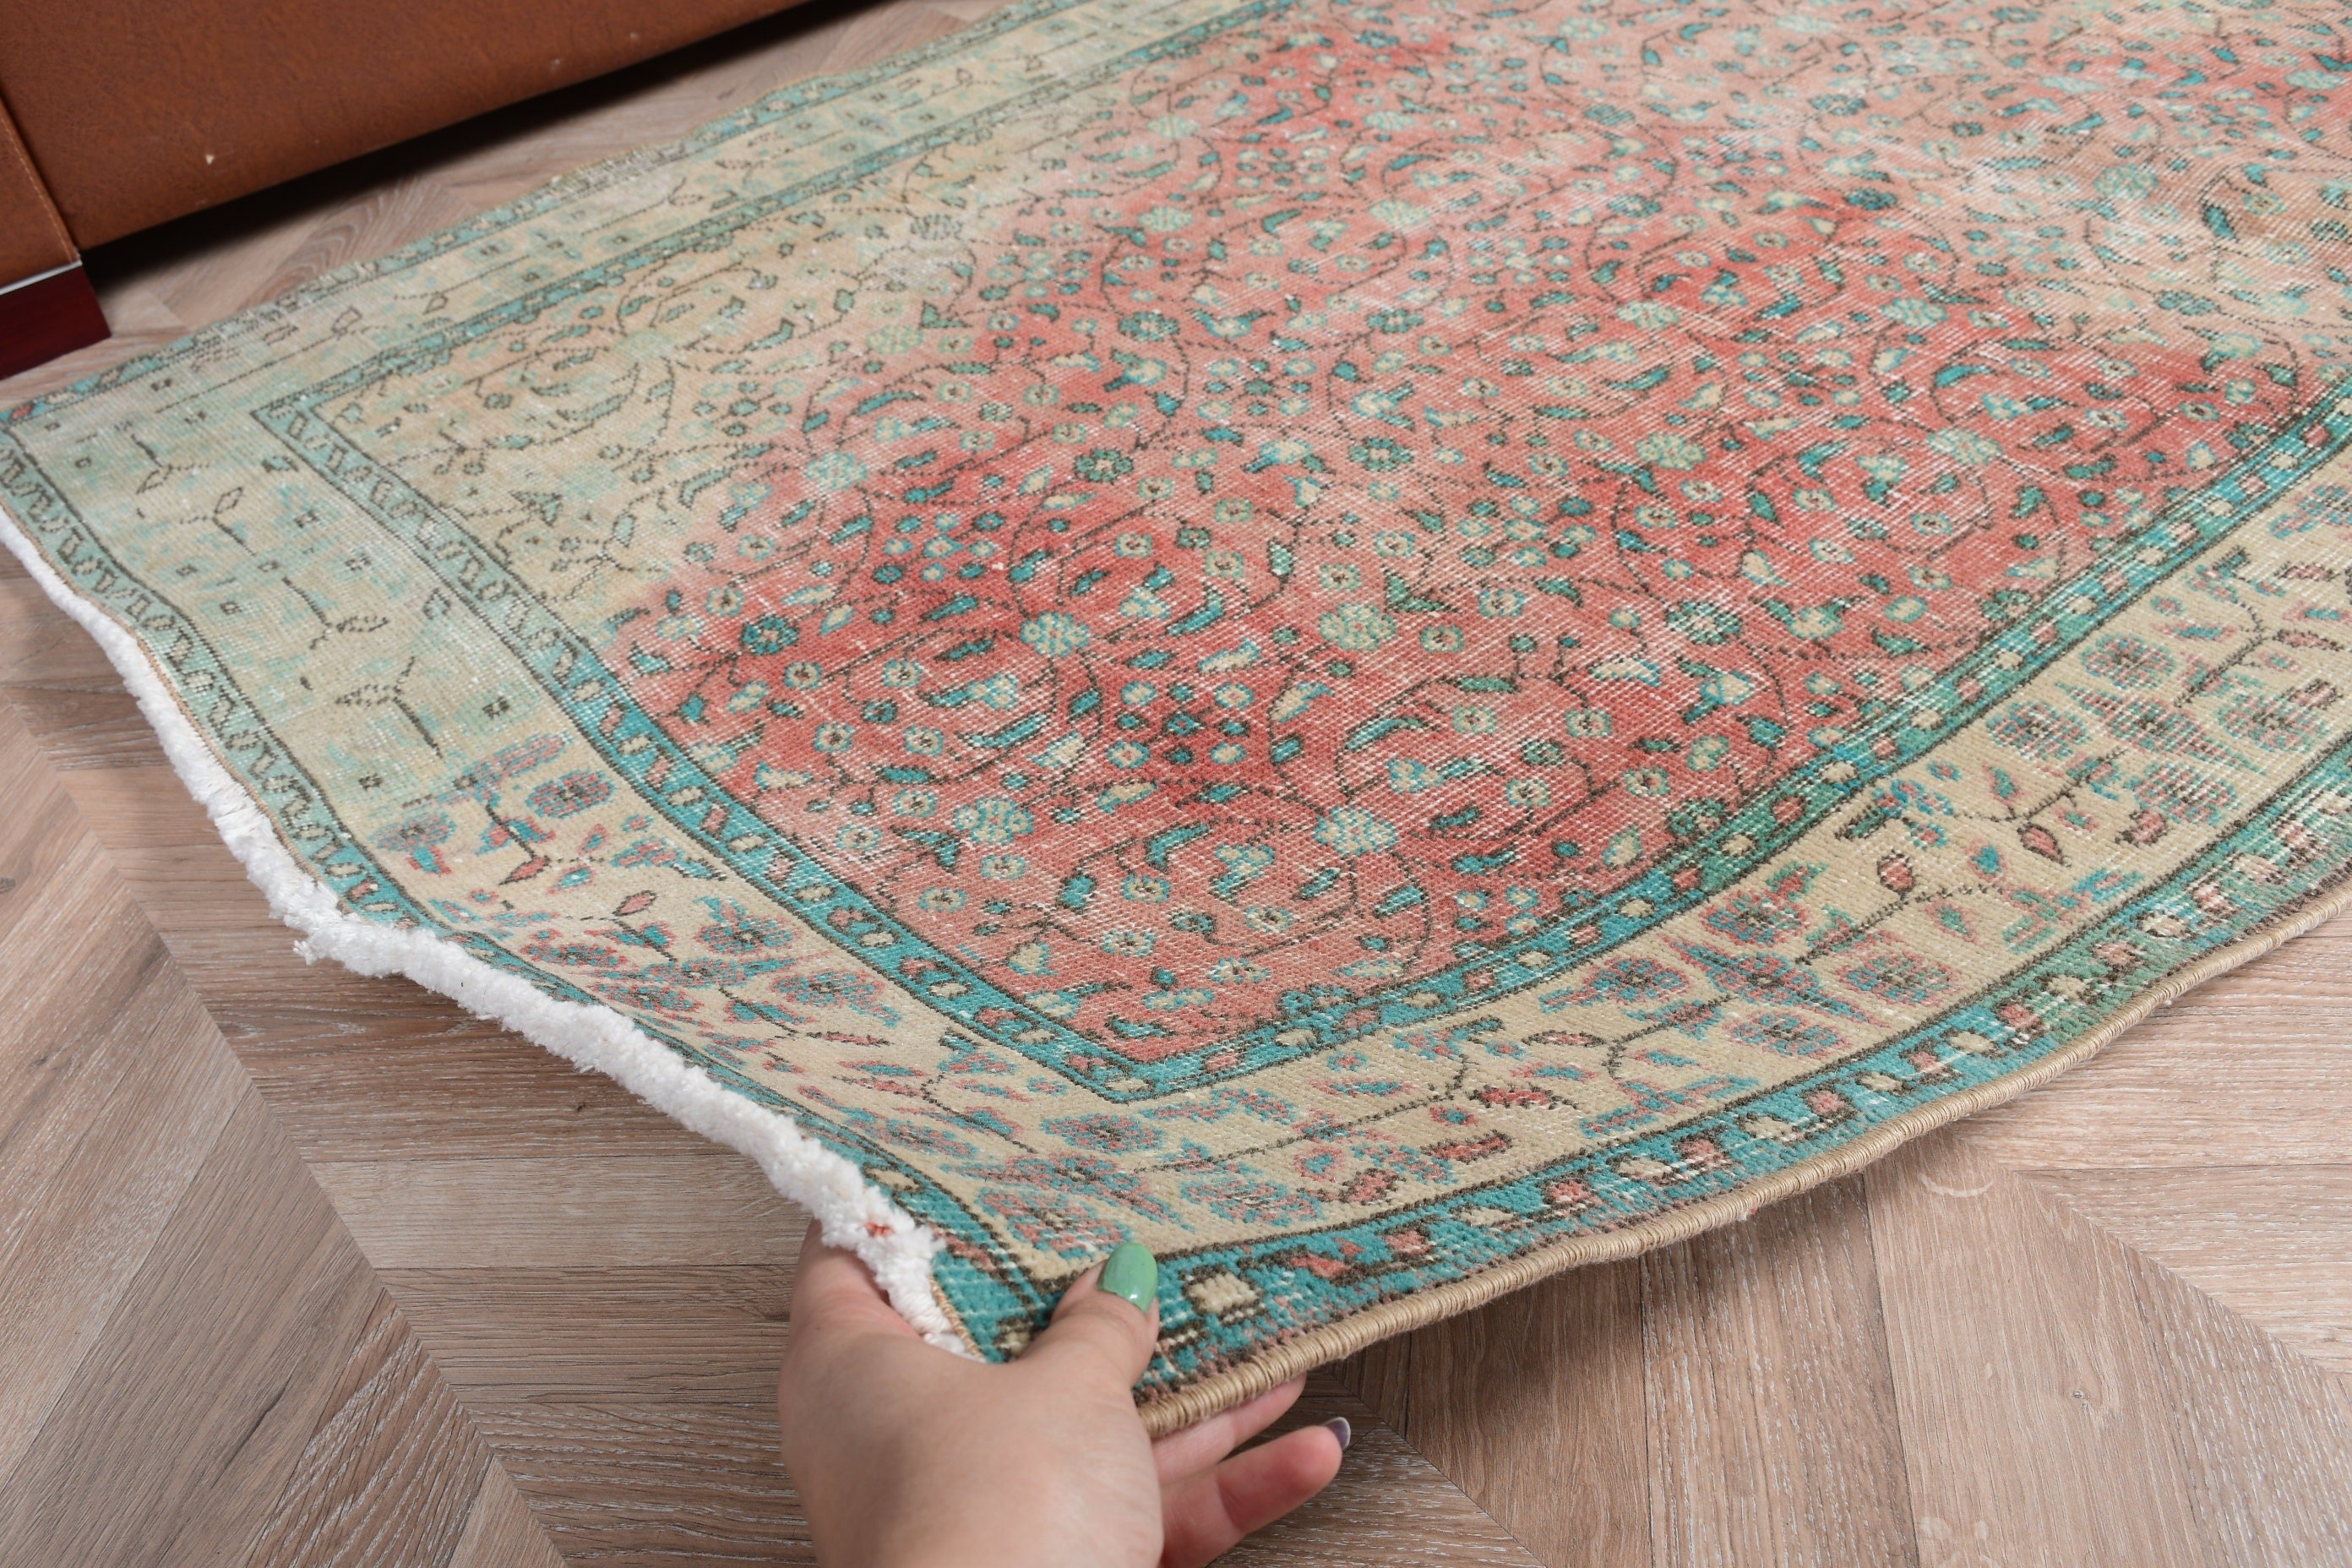 Red Antique Rug, Vintage Rugs, Kitchen Rug, Outdoor Rug, Oushak Rug, Turkish Rug, 3.5x6.1 ft Accent Rugs, Bedroom Rugs, Anatolian Rugs